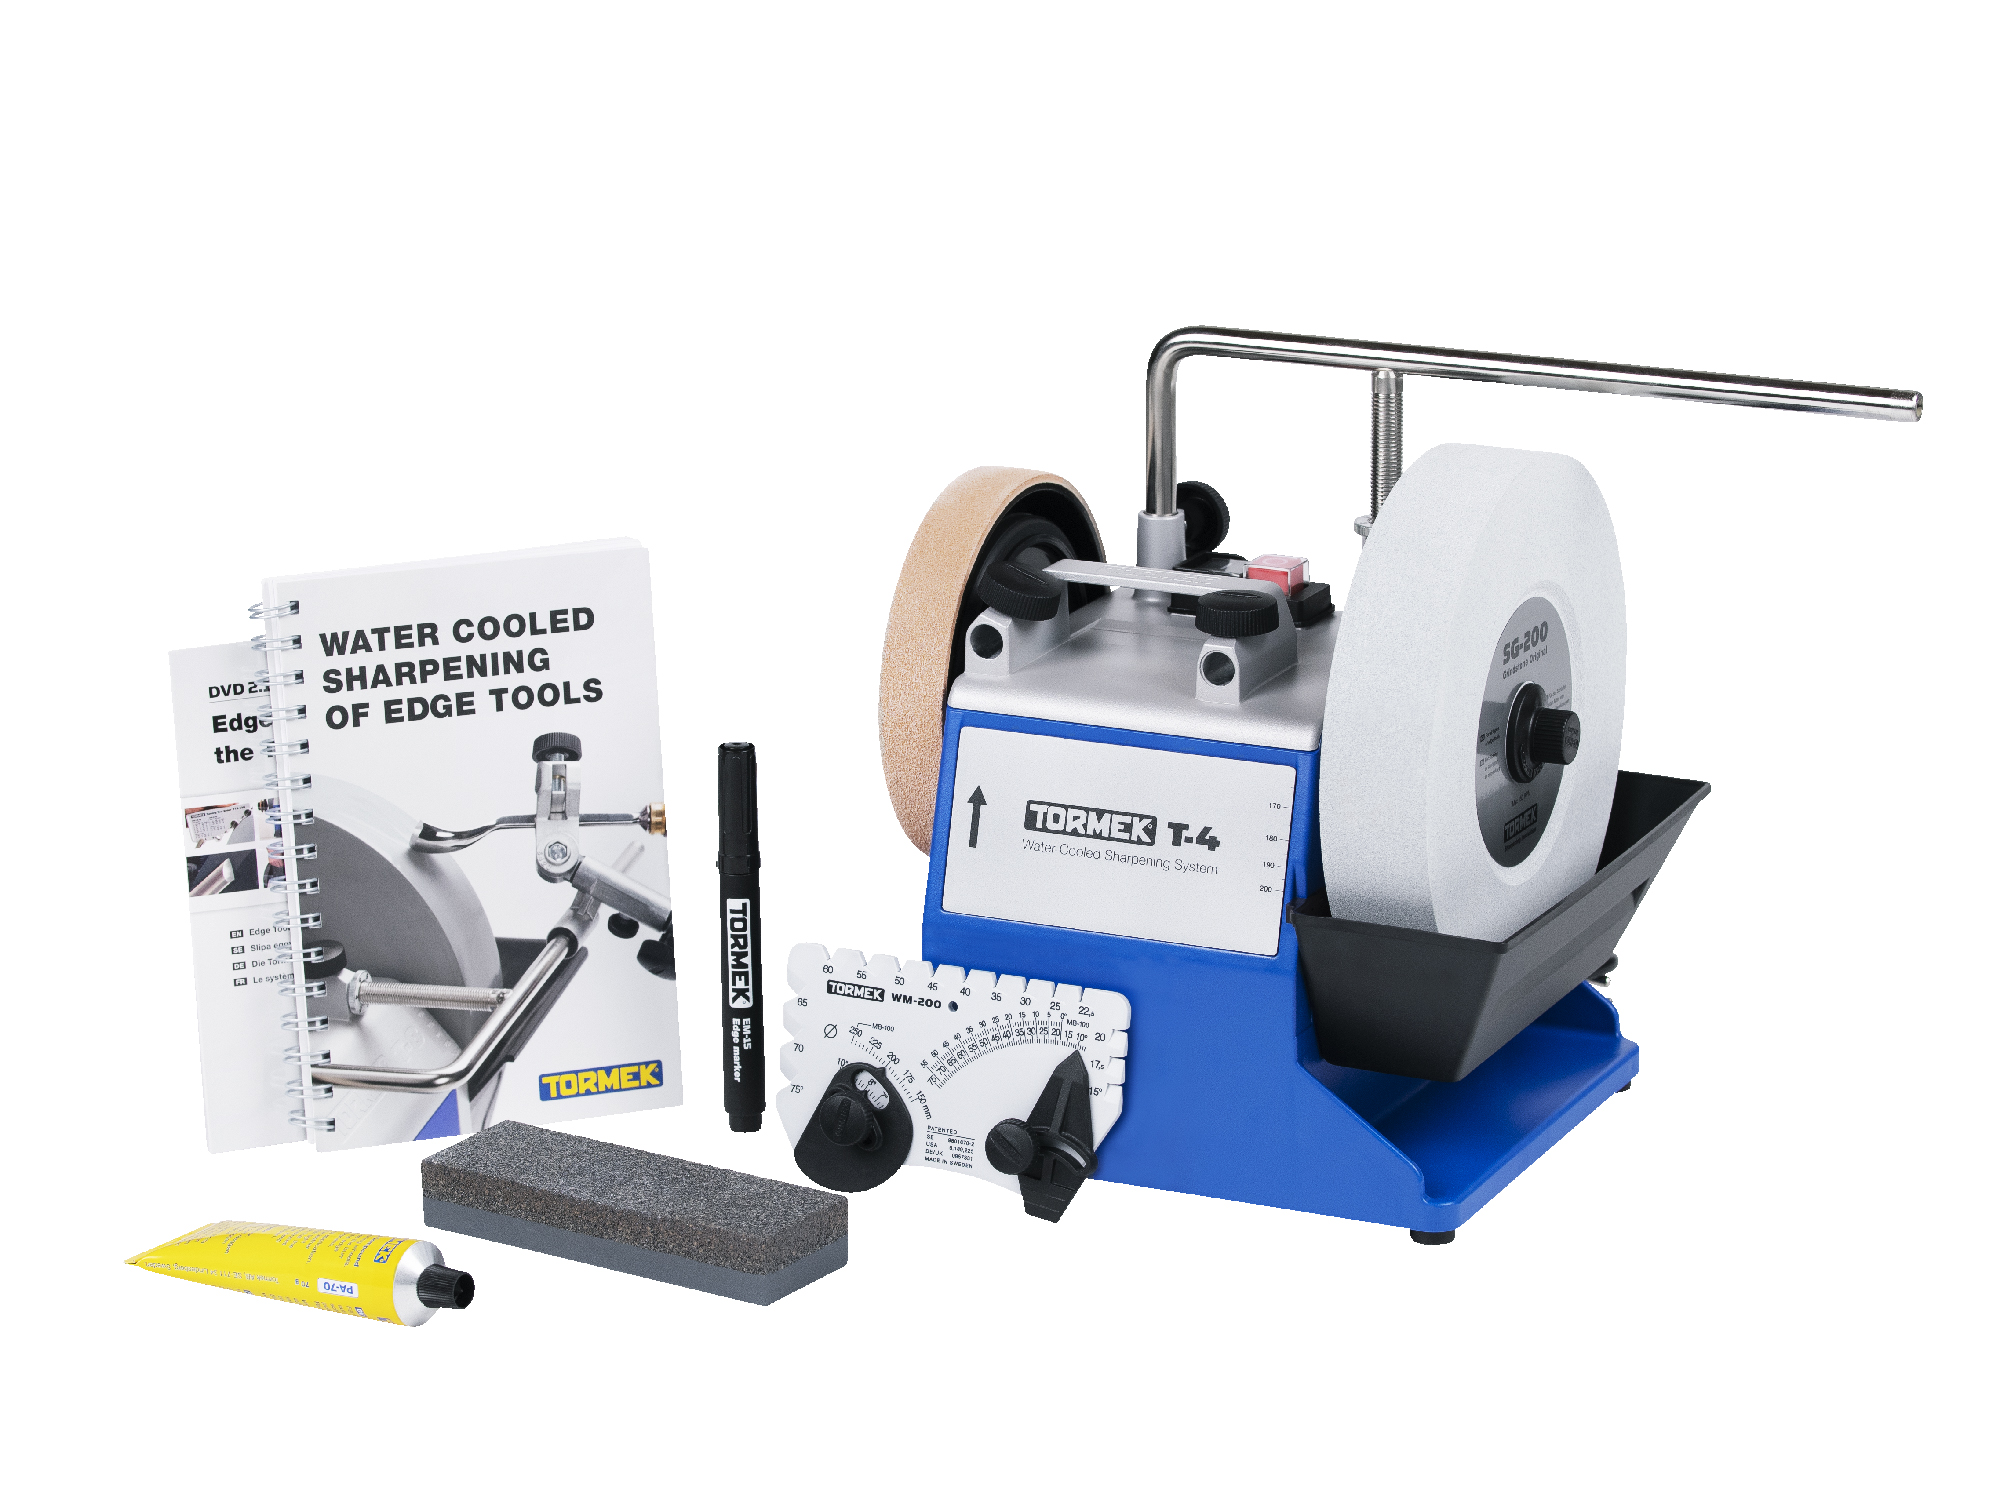 Tormek T-4 Water Cooled Sharpening System with NVR Switch